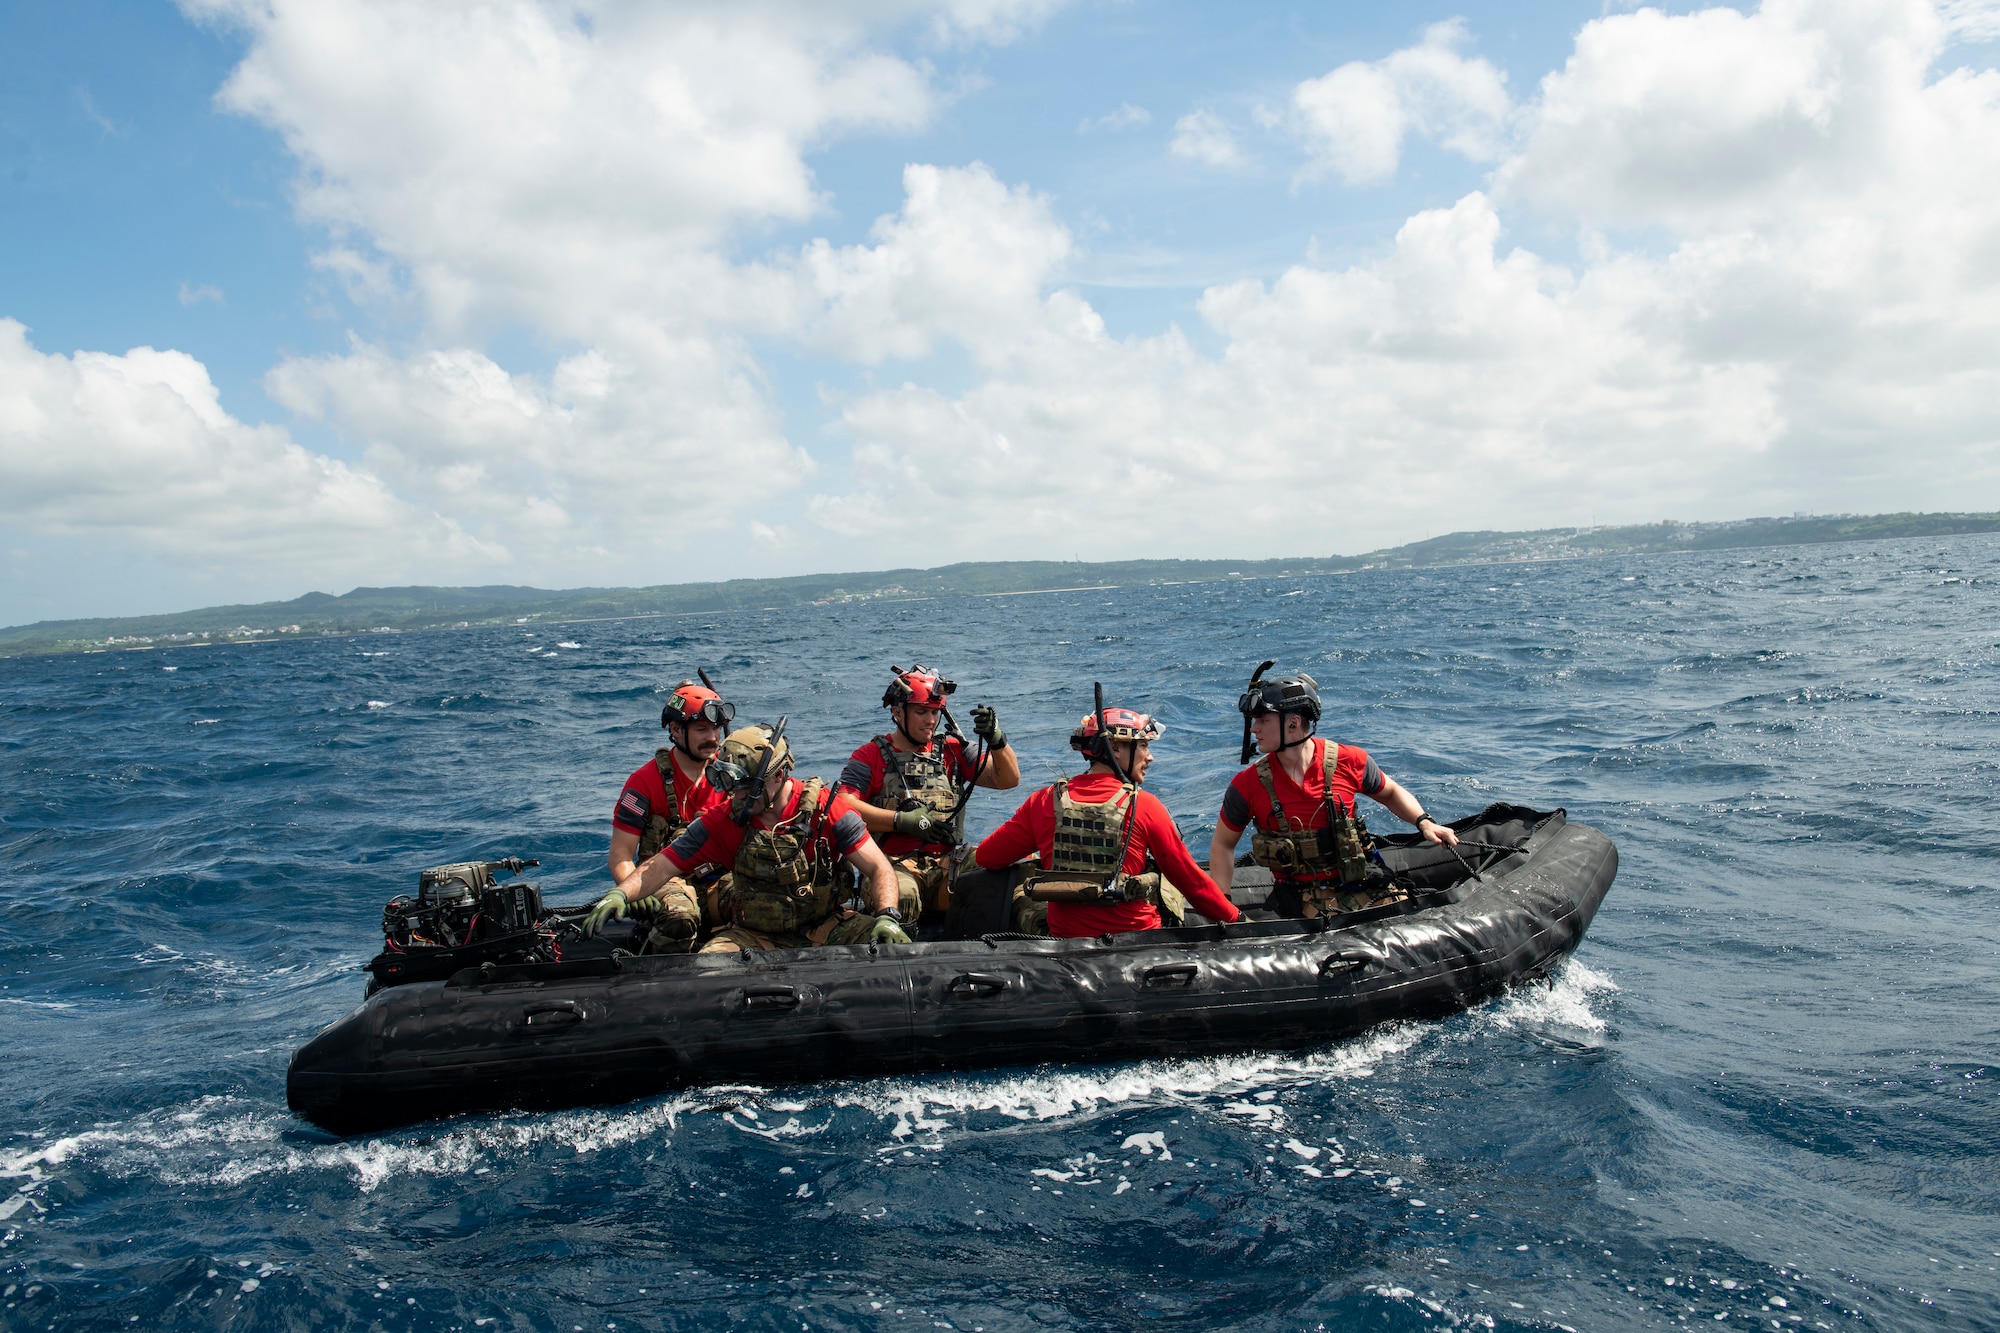 U.S. Air Force pararescuemen assigned to the 31st Rescue Squadron operate a combat rubber raiding craft during an amphibious search and rescue training in the Pacific Ocean, Sept. 13, 2022. PJ’s are trained, equipped and postured to conduct full spectrum personnel recovery operations in both peacetime and combat environments. (U.S. Air Force photo by Senior Airman Jessi Roth)